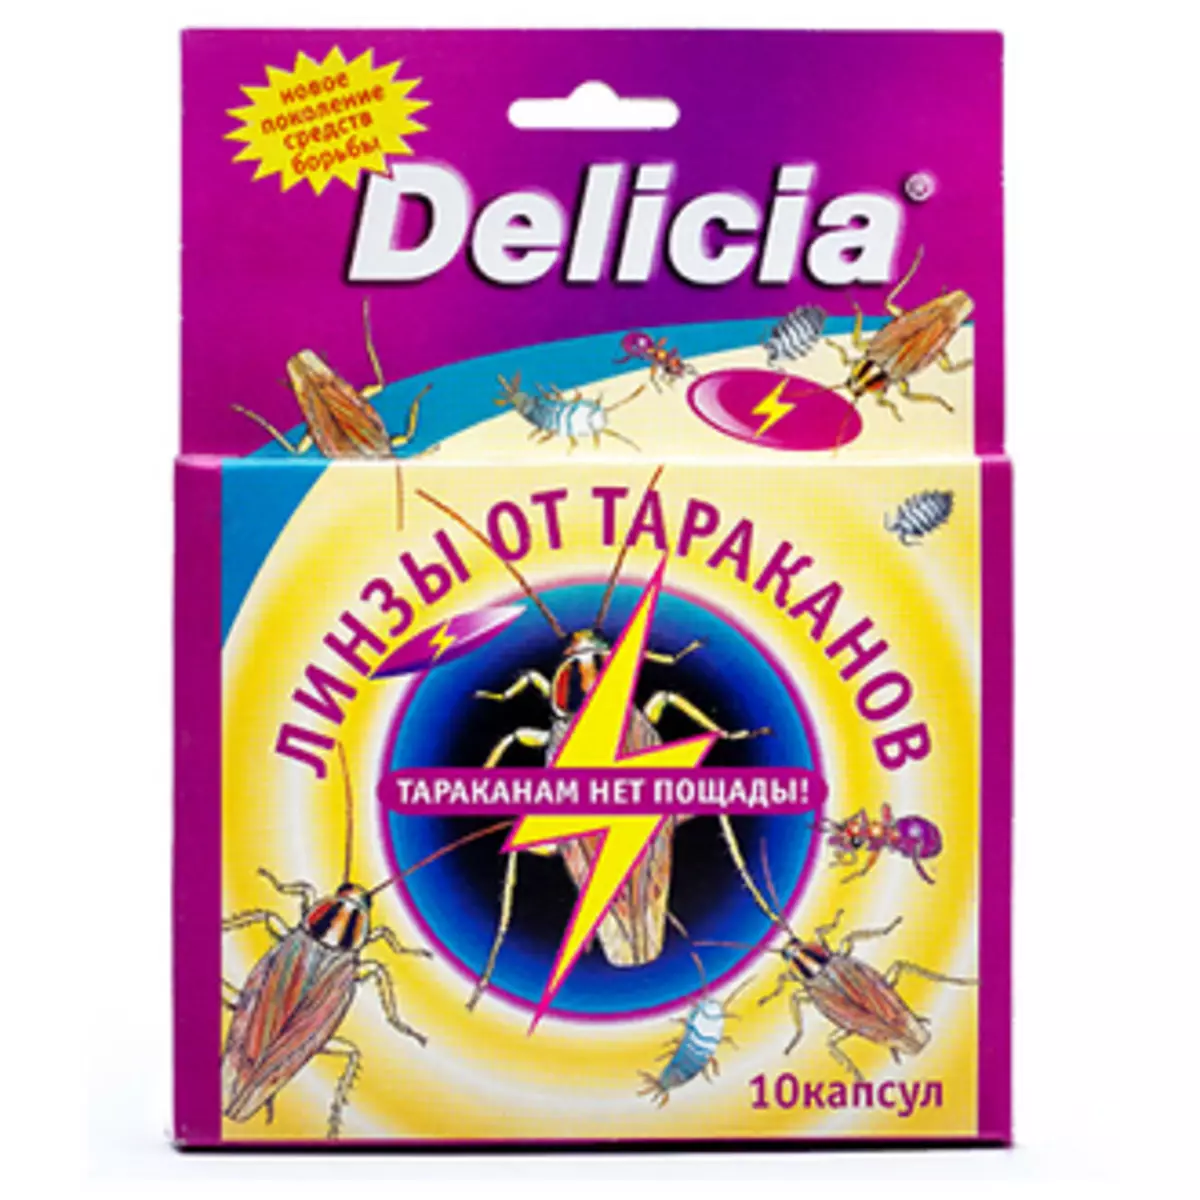 Delicia Tabsts ຈາກ cockroaches